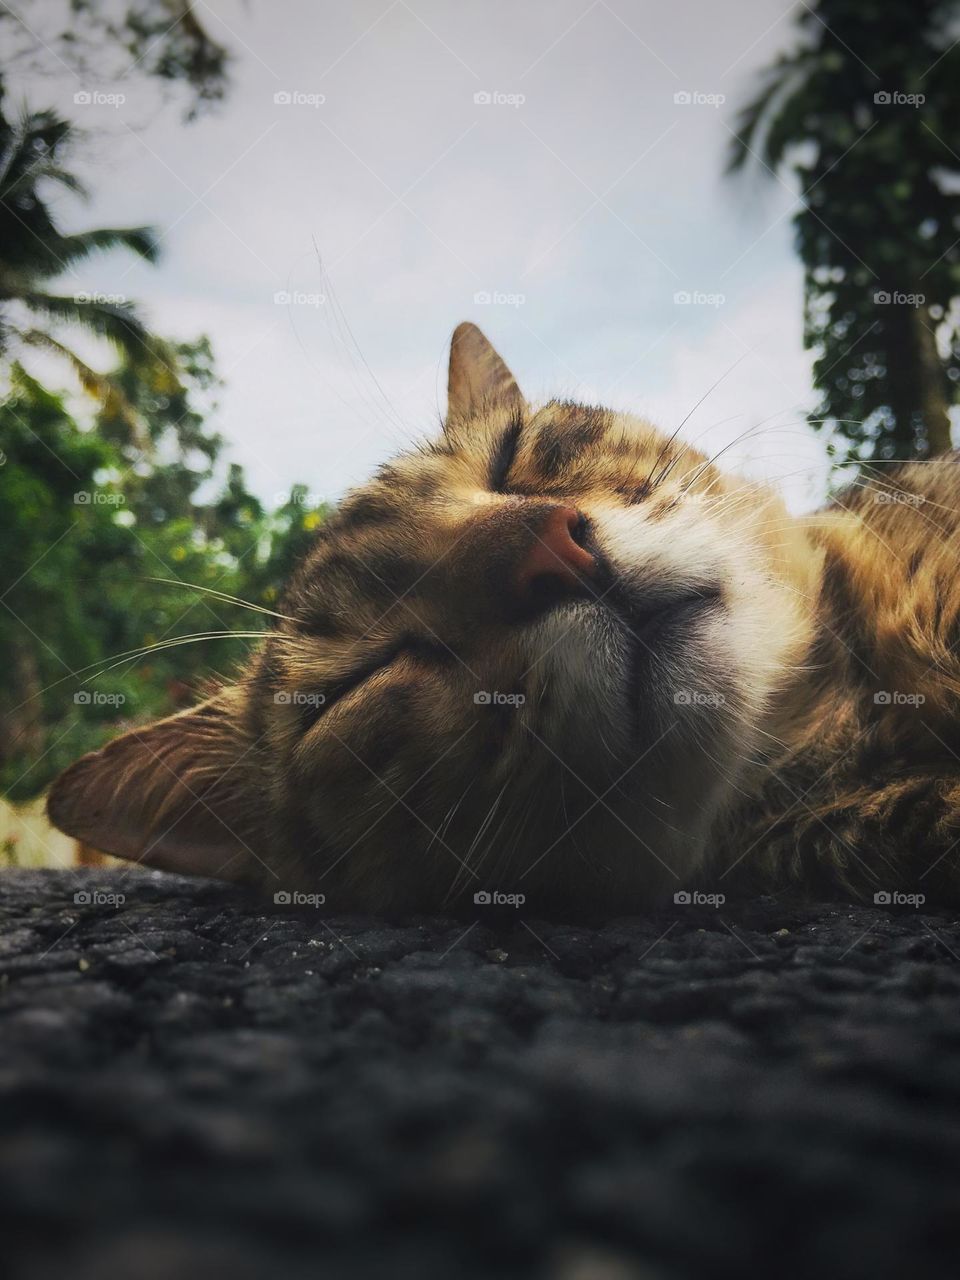 Close up of a cat sleeping peacefully on the ground